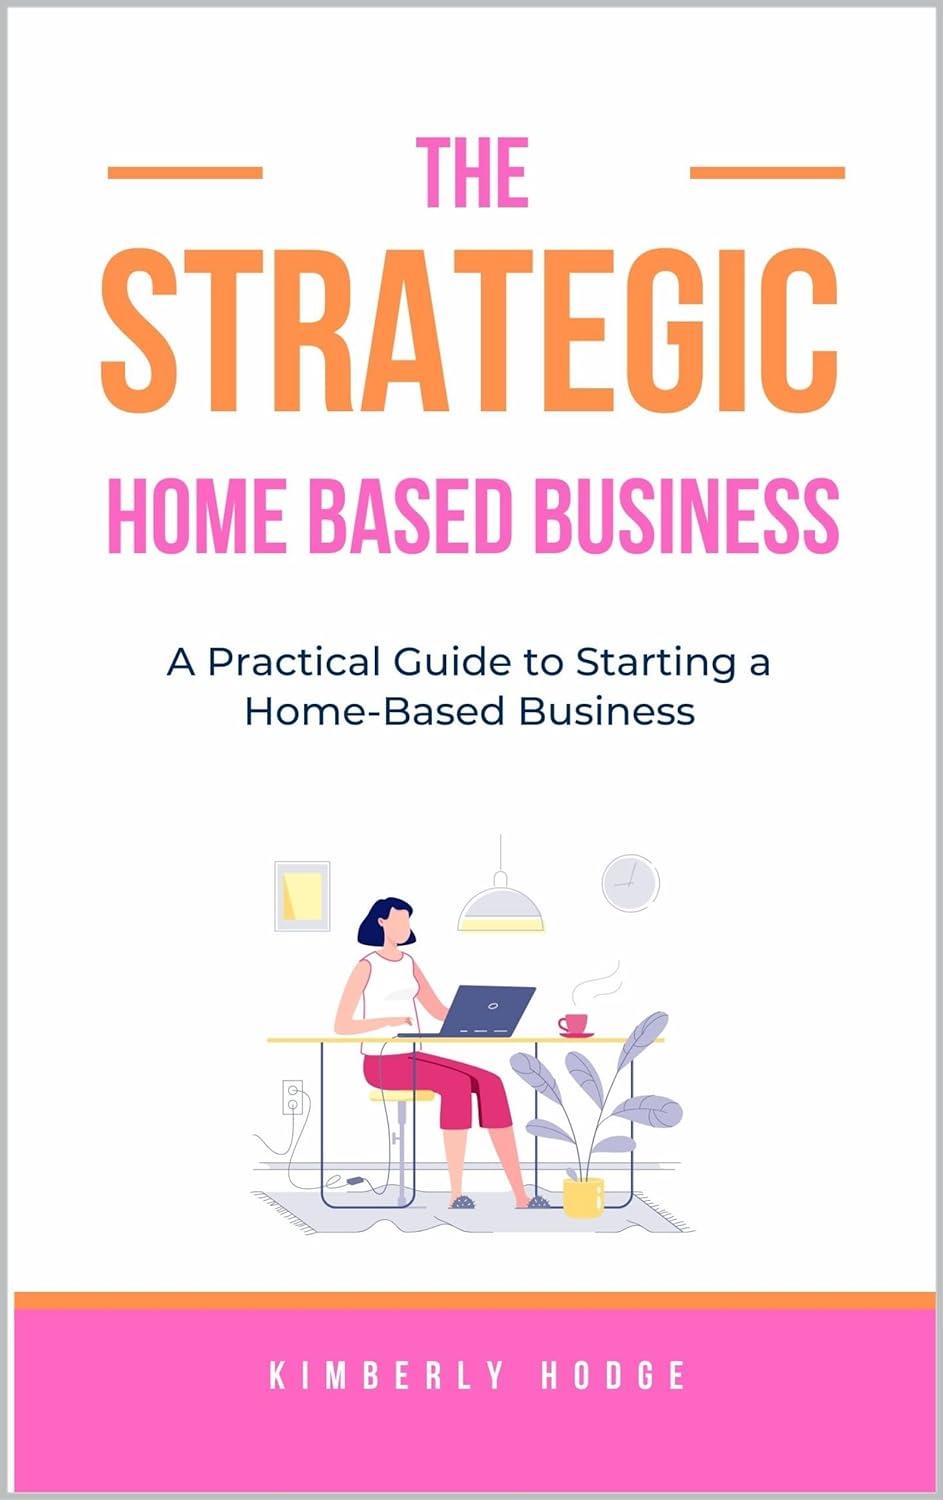 The Strategic Home-Based Business Guide: A Practical Guide to Starting a Home-Based Business